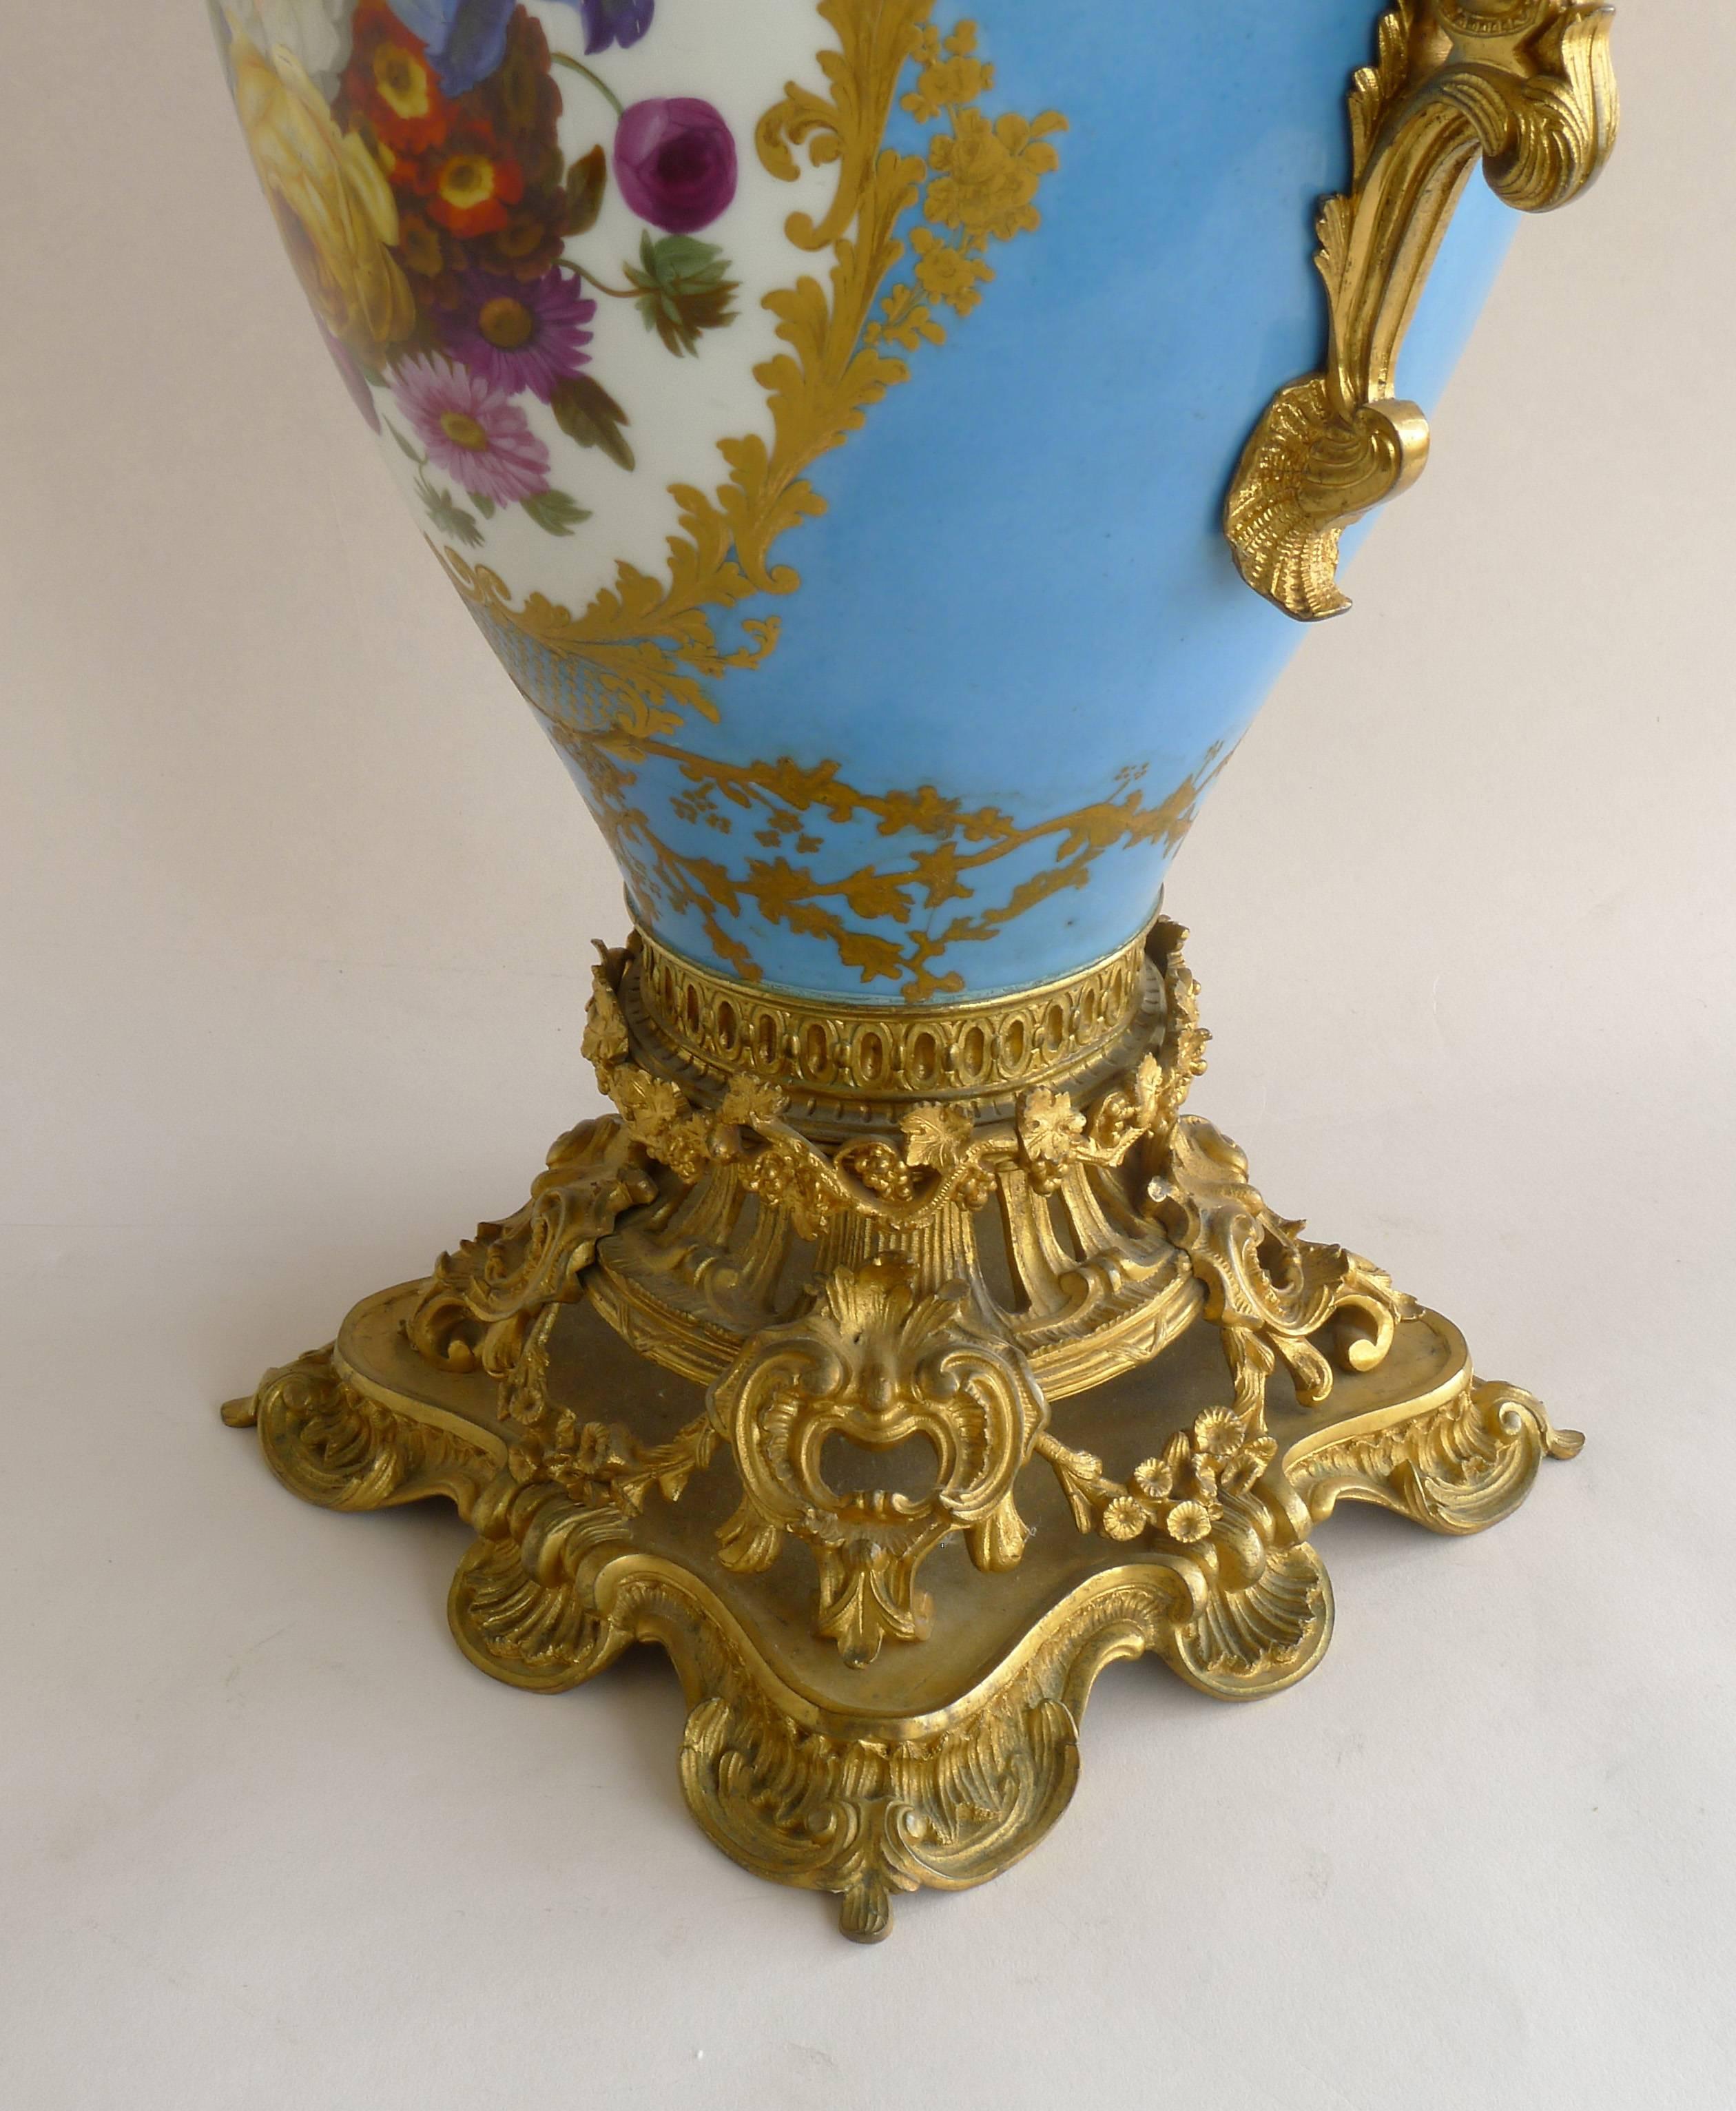 French Sevres Palace Urn, in 